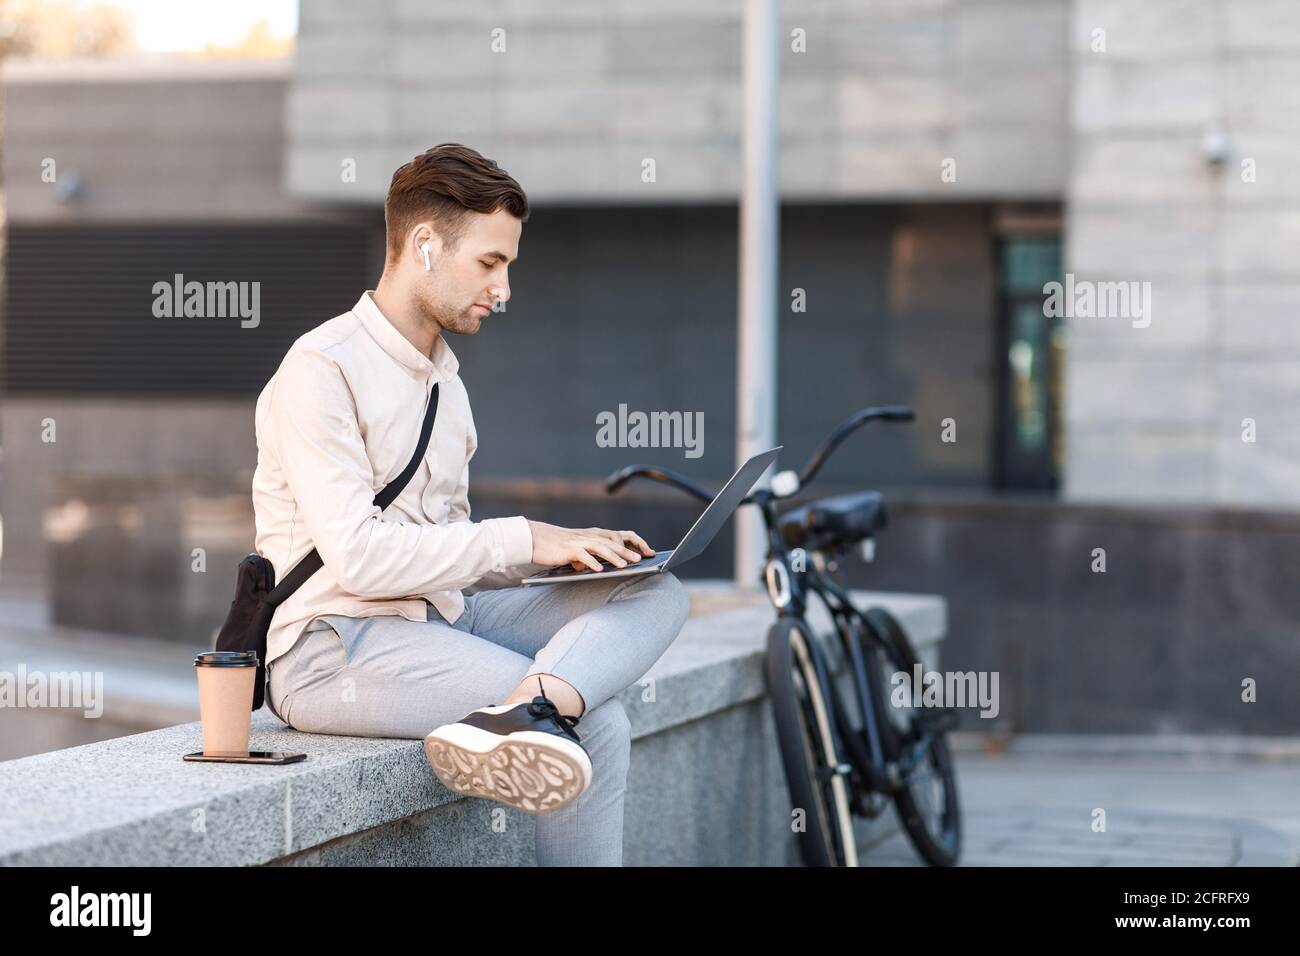 Office online outdoor. Busy man working on laptop with wireless headphones Stock Photo